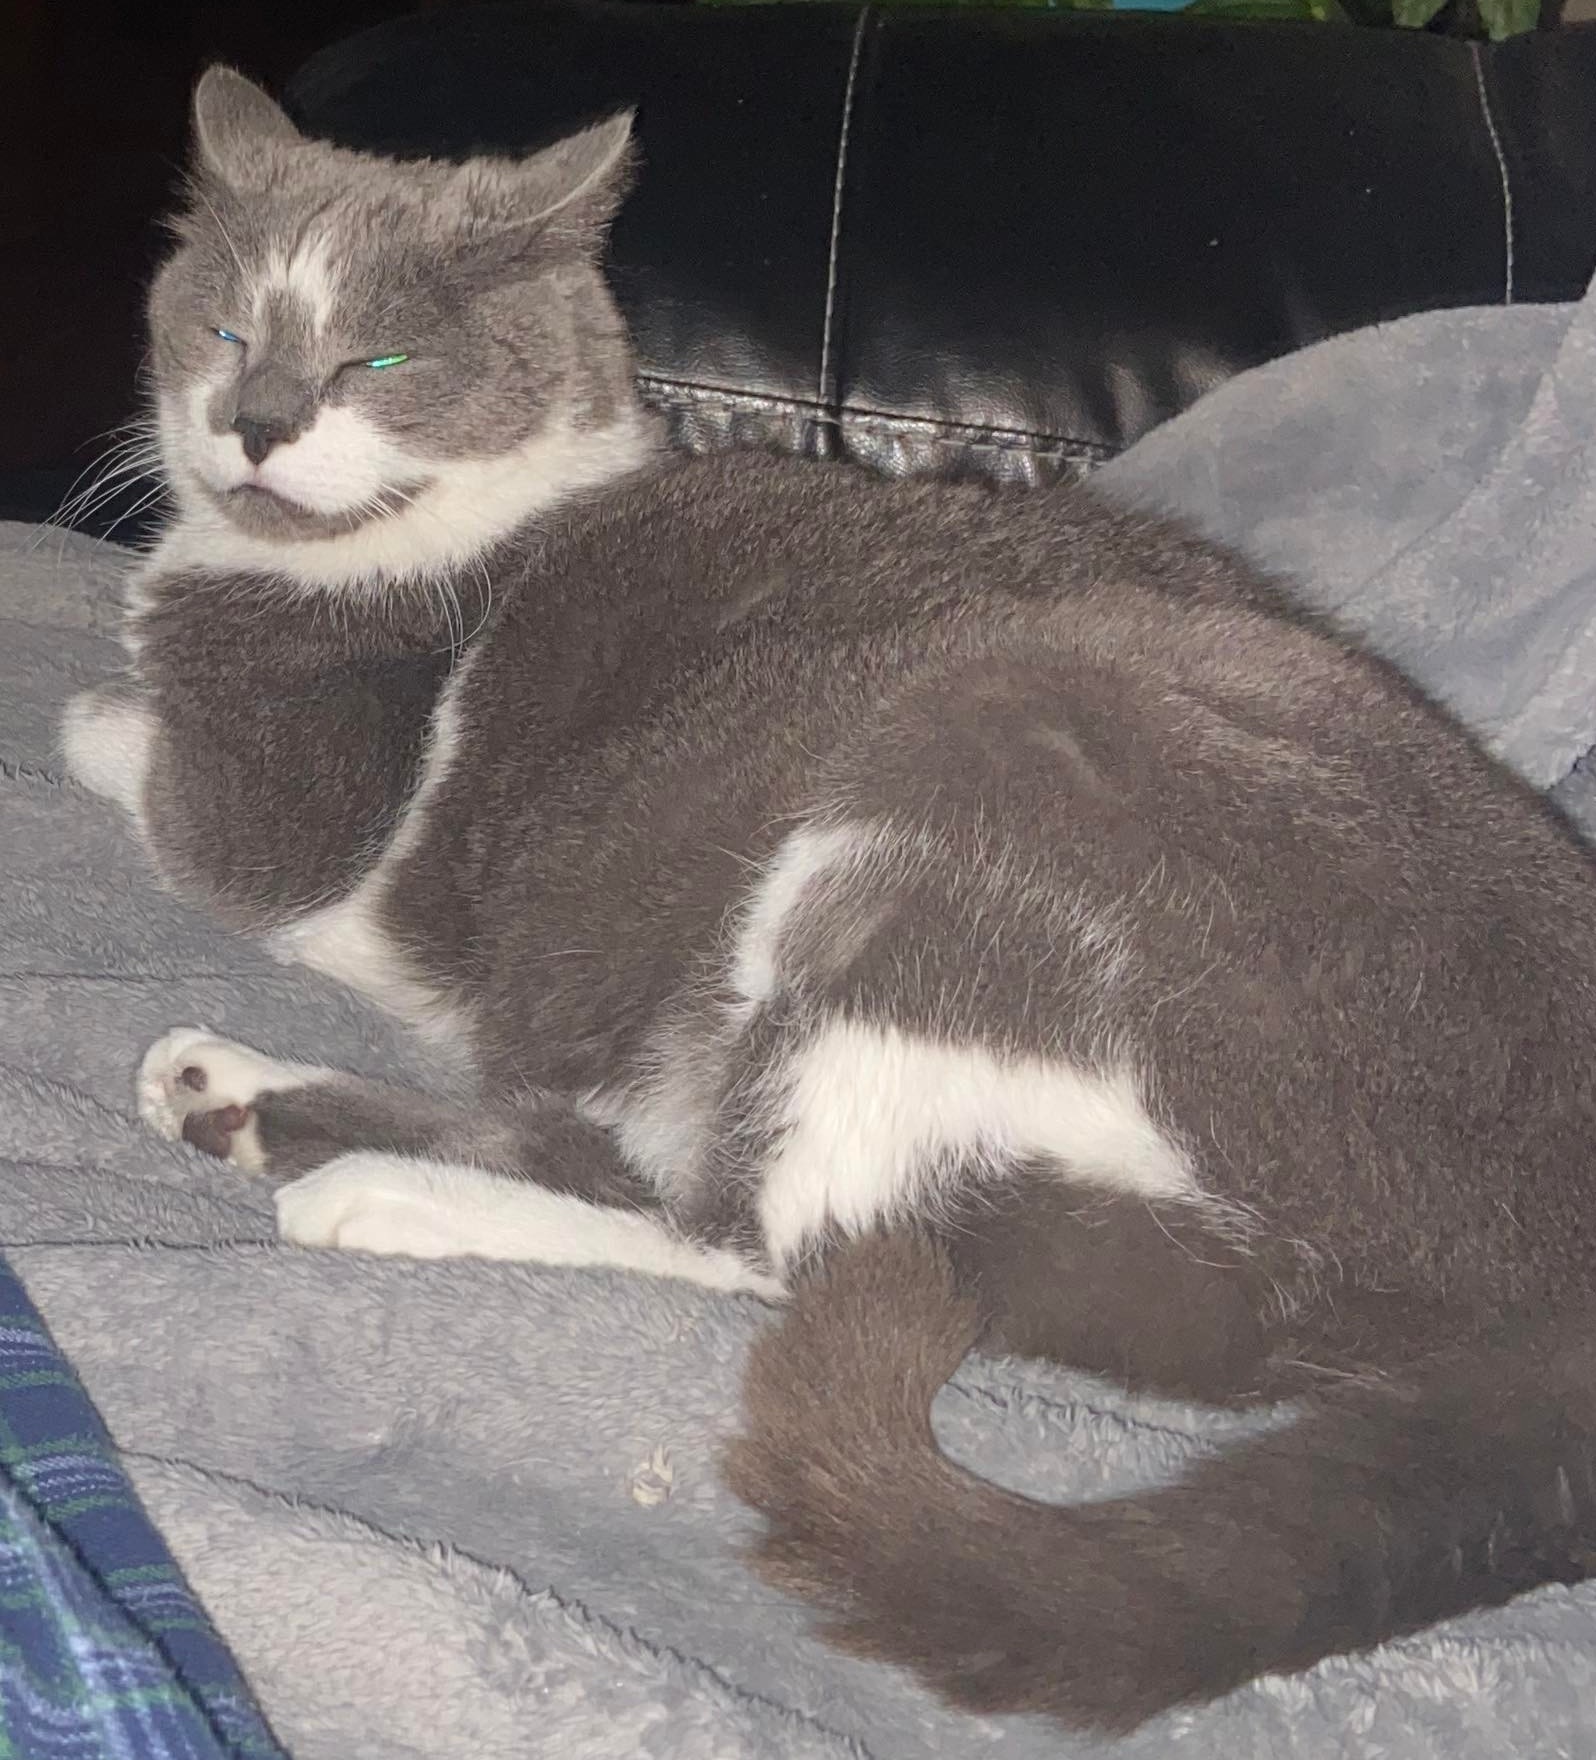 overexposed picture of a grey and white cat making a stupid face, his name is Pokey